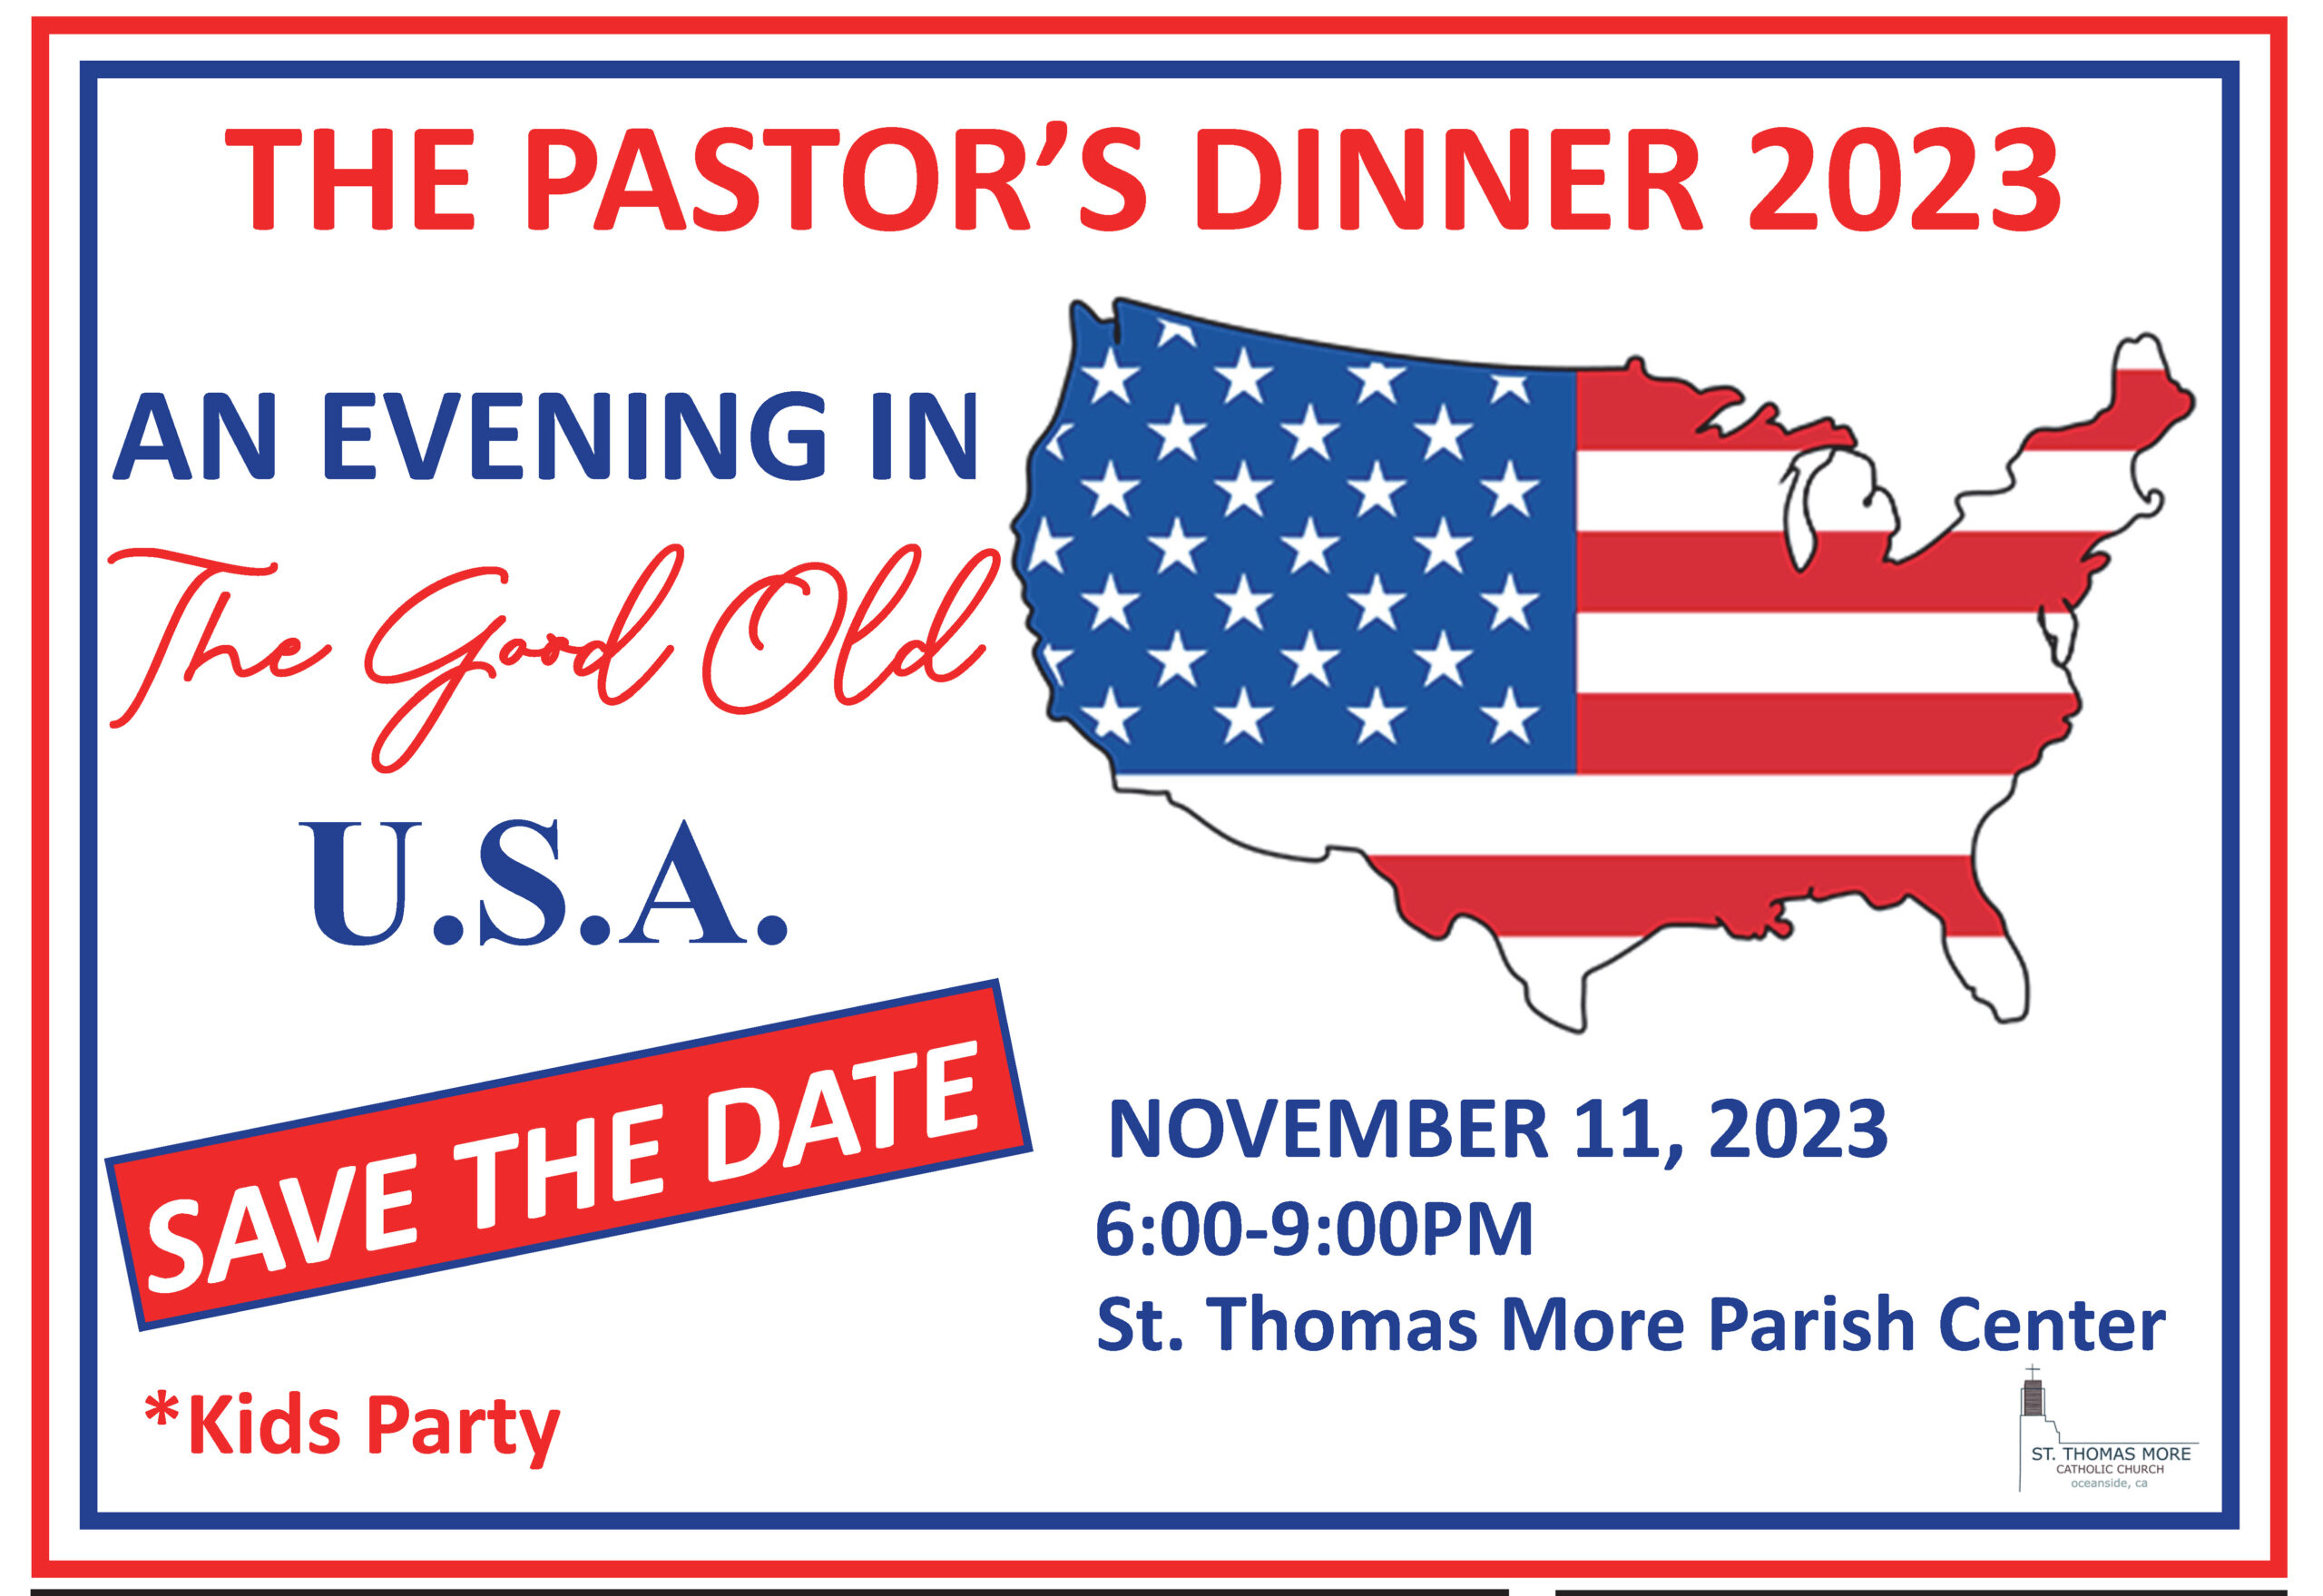 Pastor’s Dinner November 11: An Evening in the Good Old USA